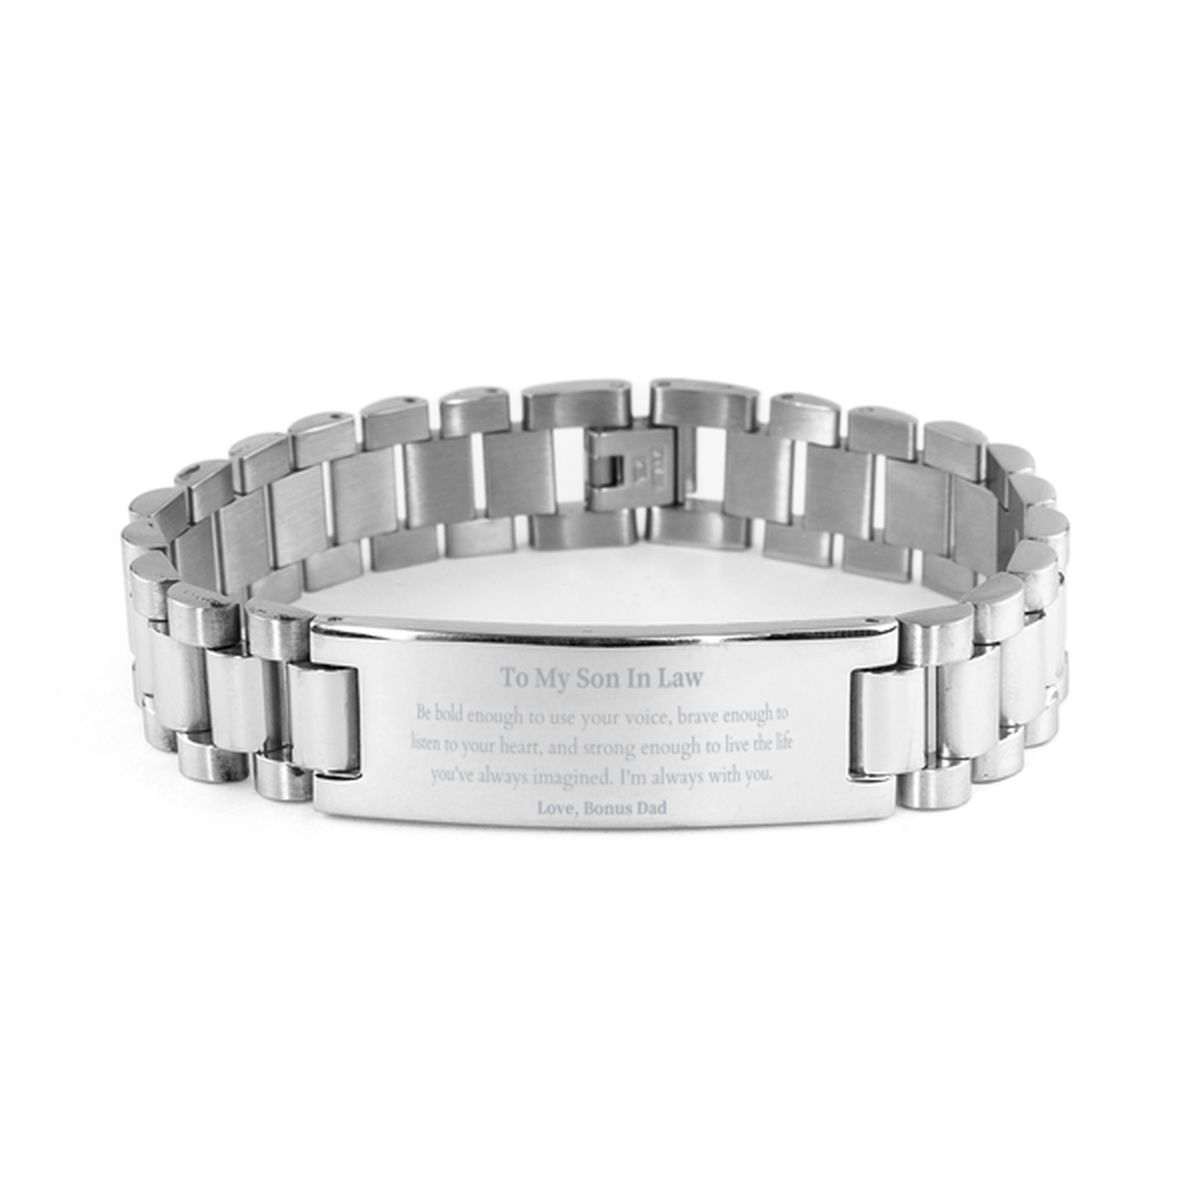 Keepsake Son In Law Ladder Stainless Steel Bracelet Gift Idea Graduation Christmas Birthday Son In Law from Bonus Dad, Son In Law Be bold enough to use your voice, brave enough to listen to your heart. Love, Bonus Dad